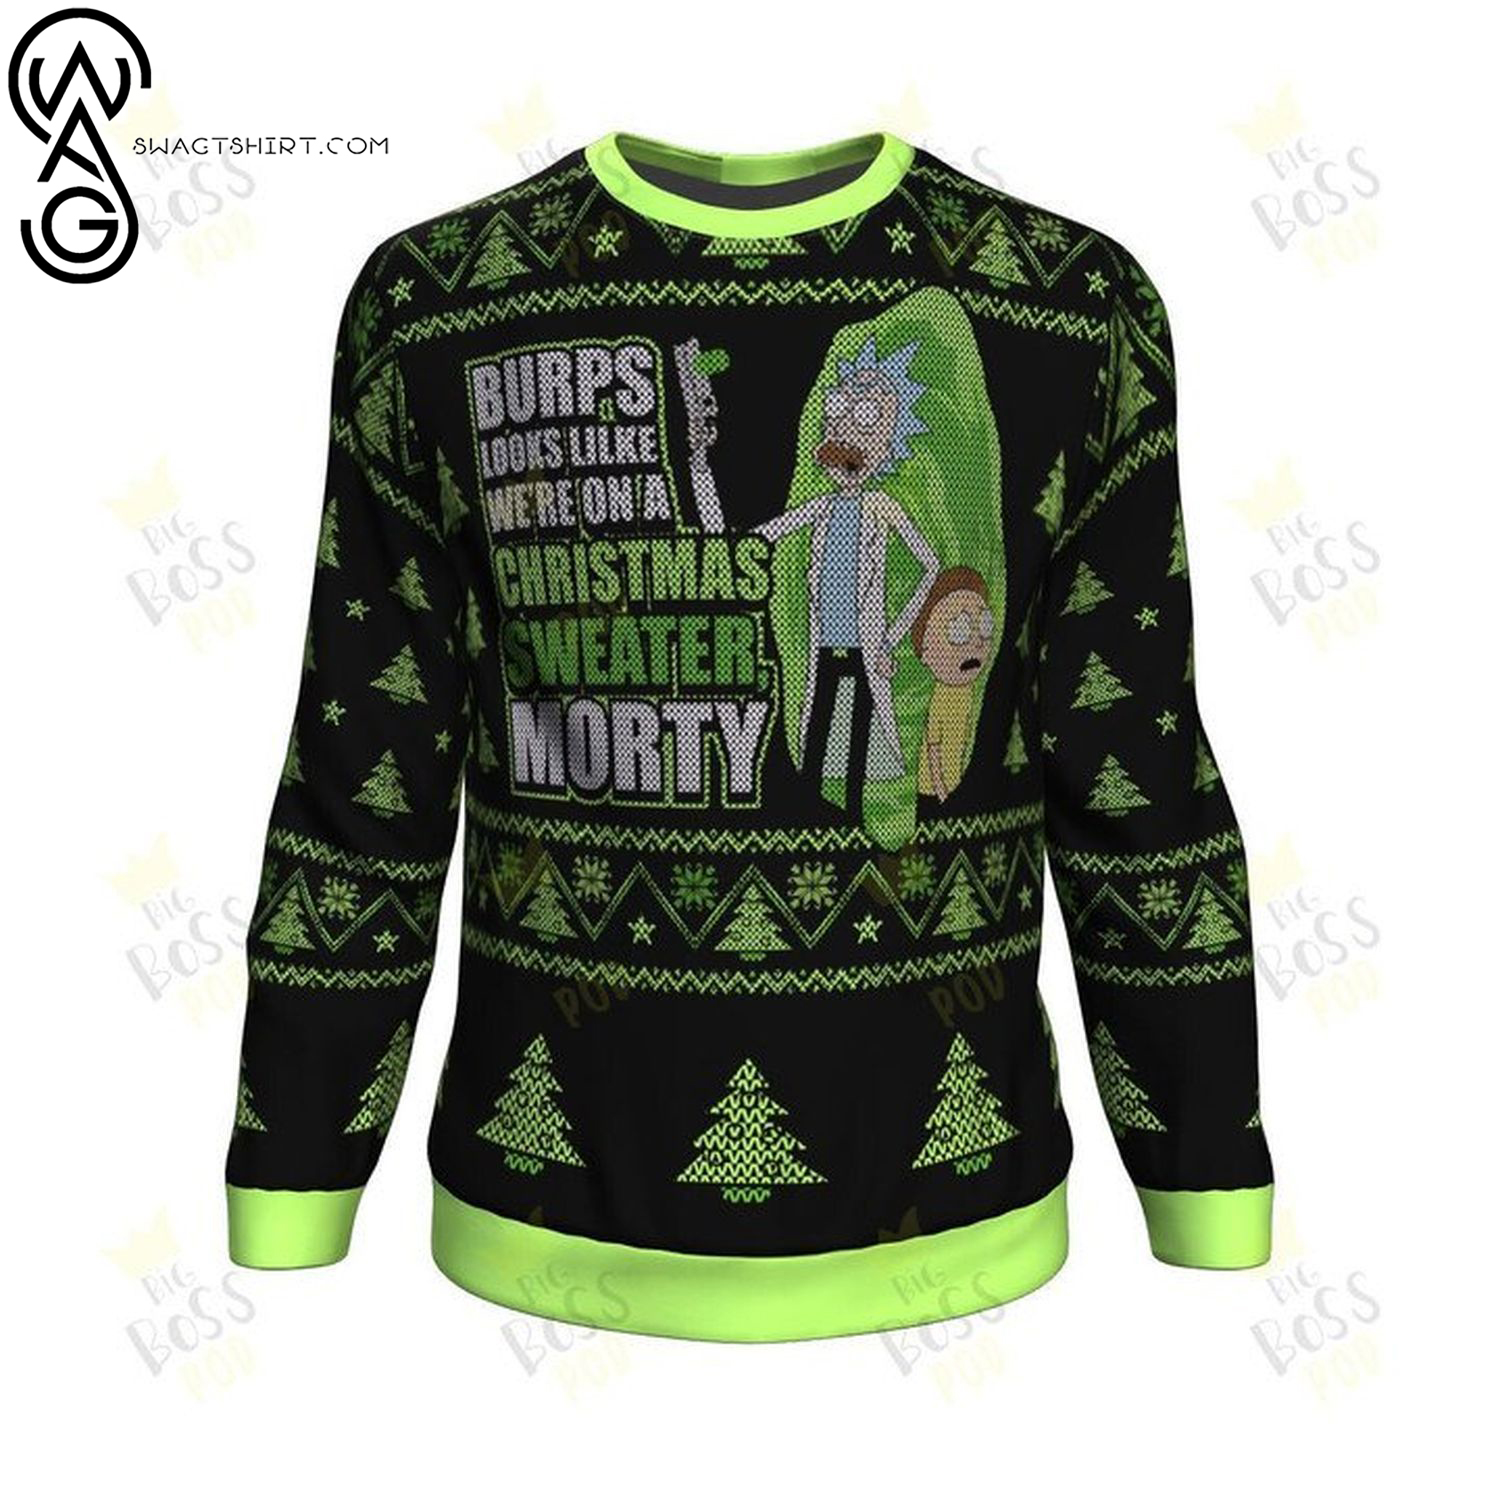 Rick and morty burps look like we're on a christmas sweater ugly christmas sweater - Copy (3)